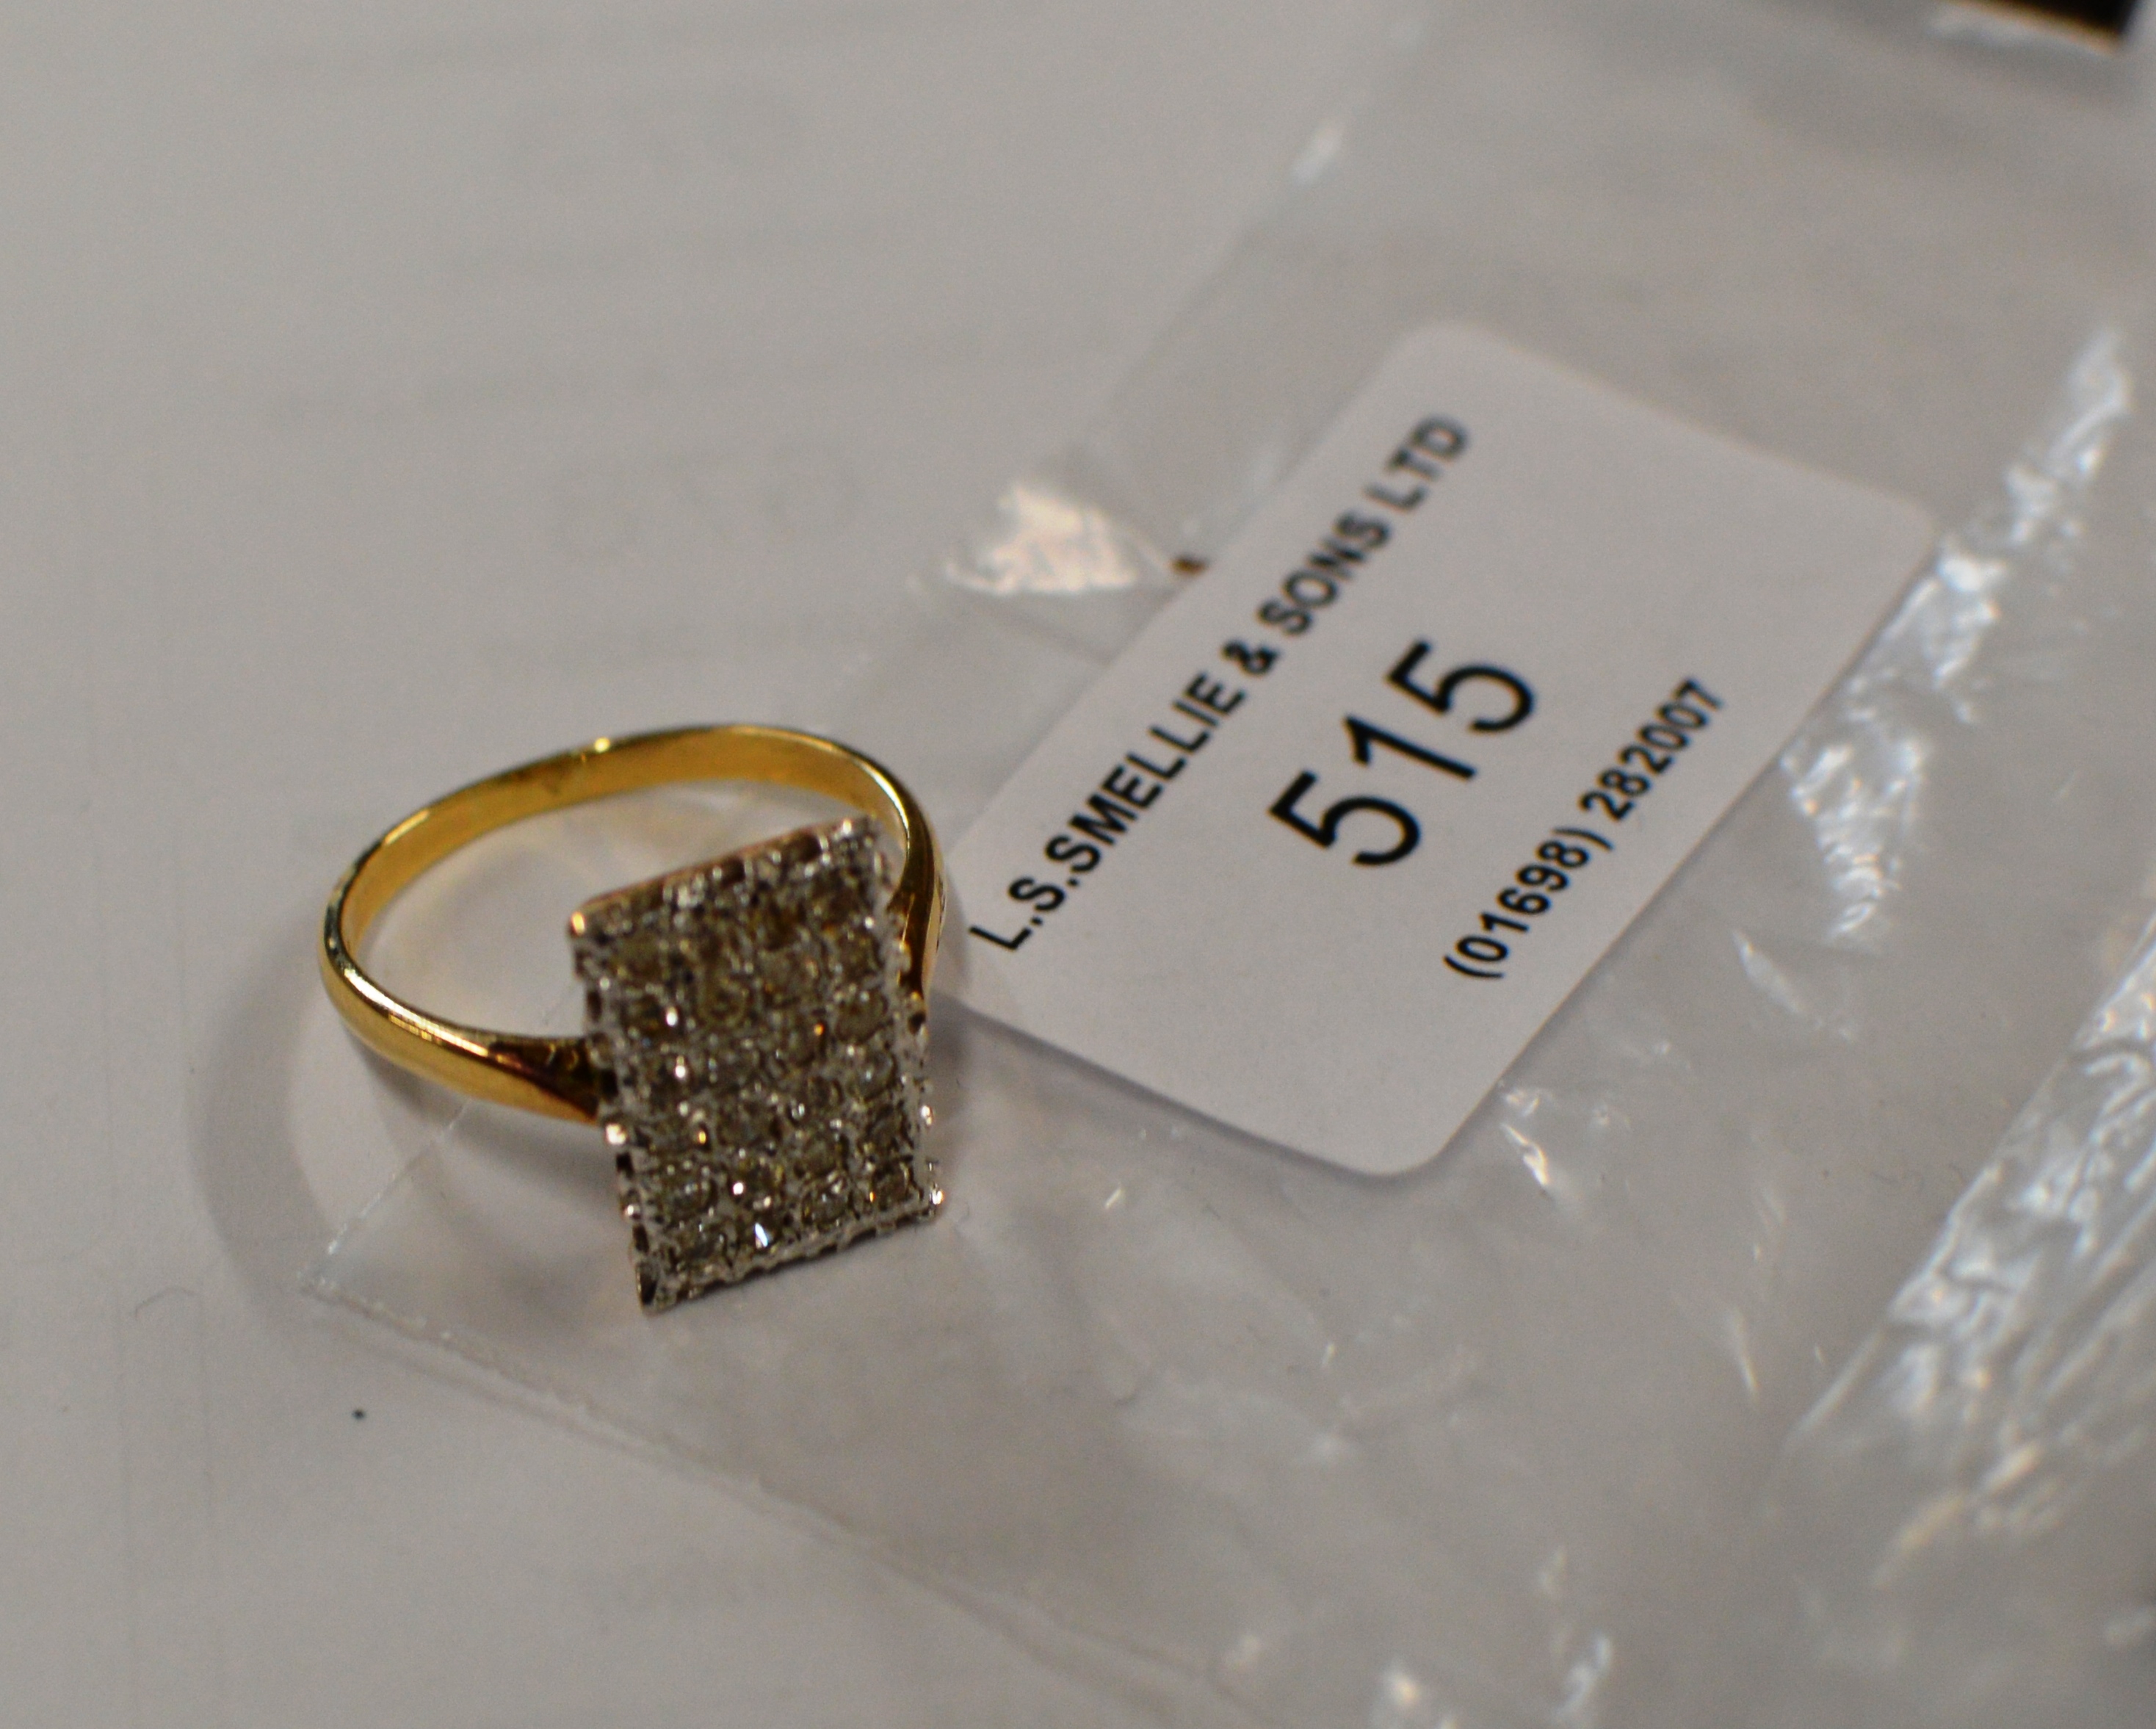 18 CARAT GOLD DIAMOND CHIP RING - APPROXIMATE WEIGHT = 4.7 GRAMS